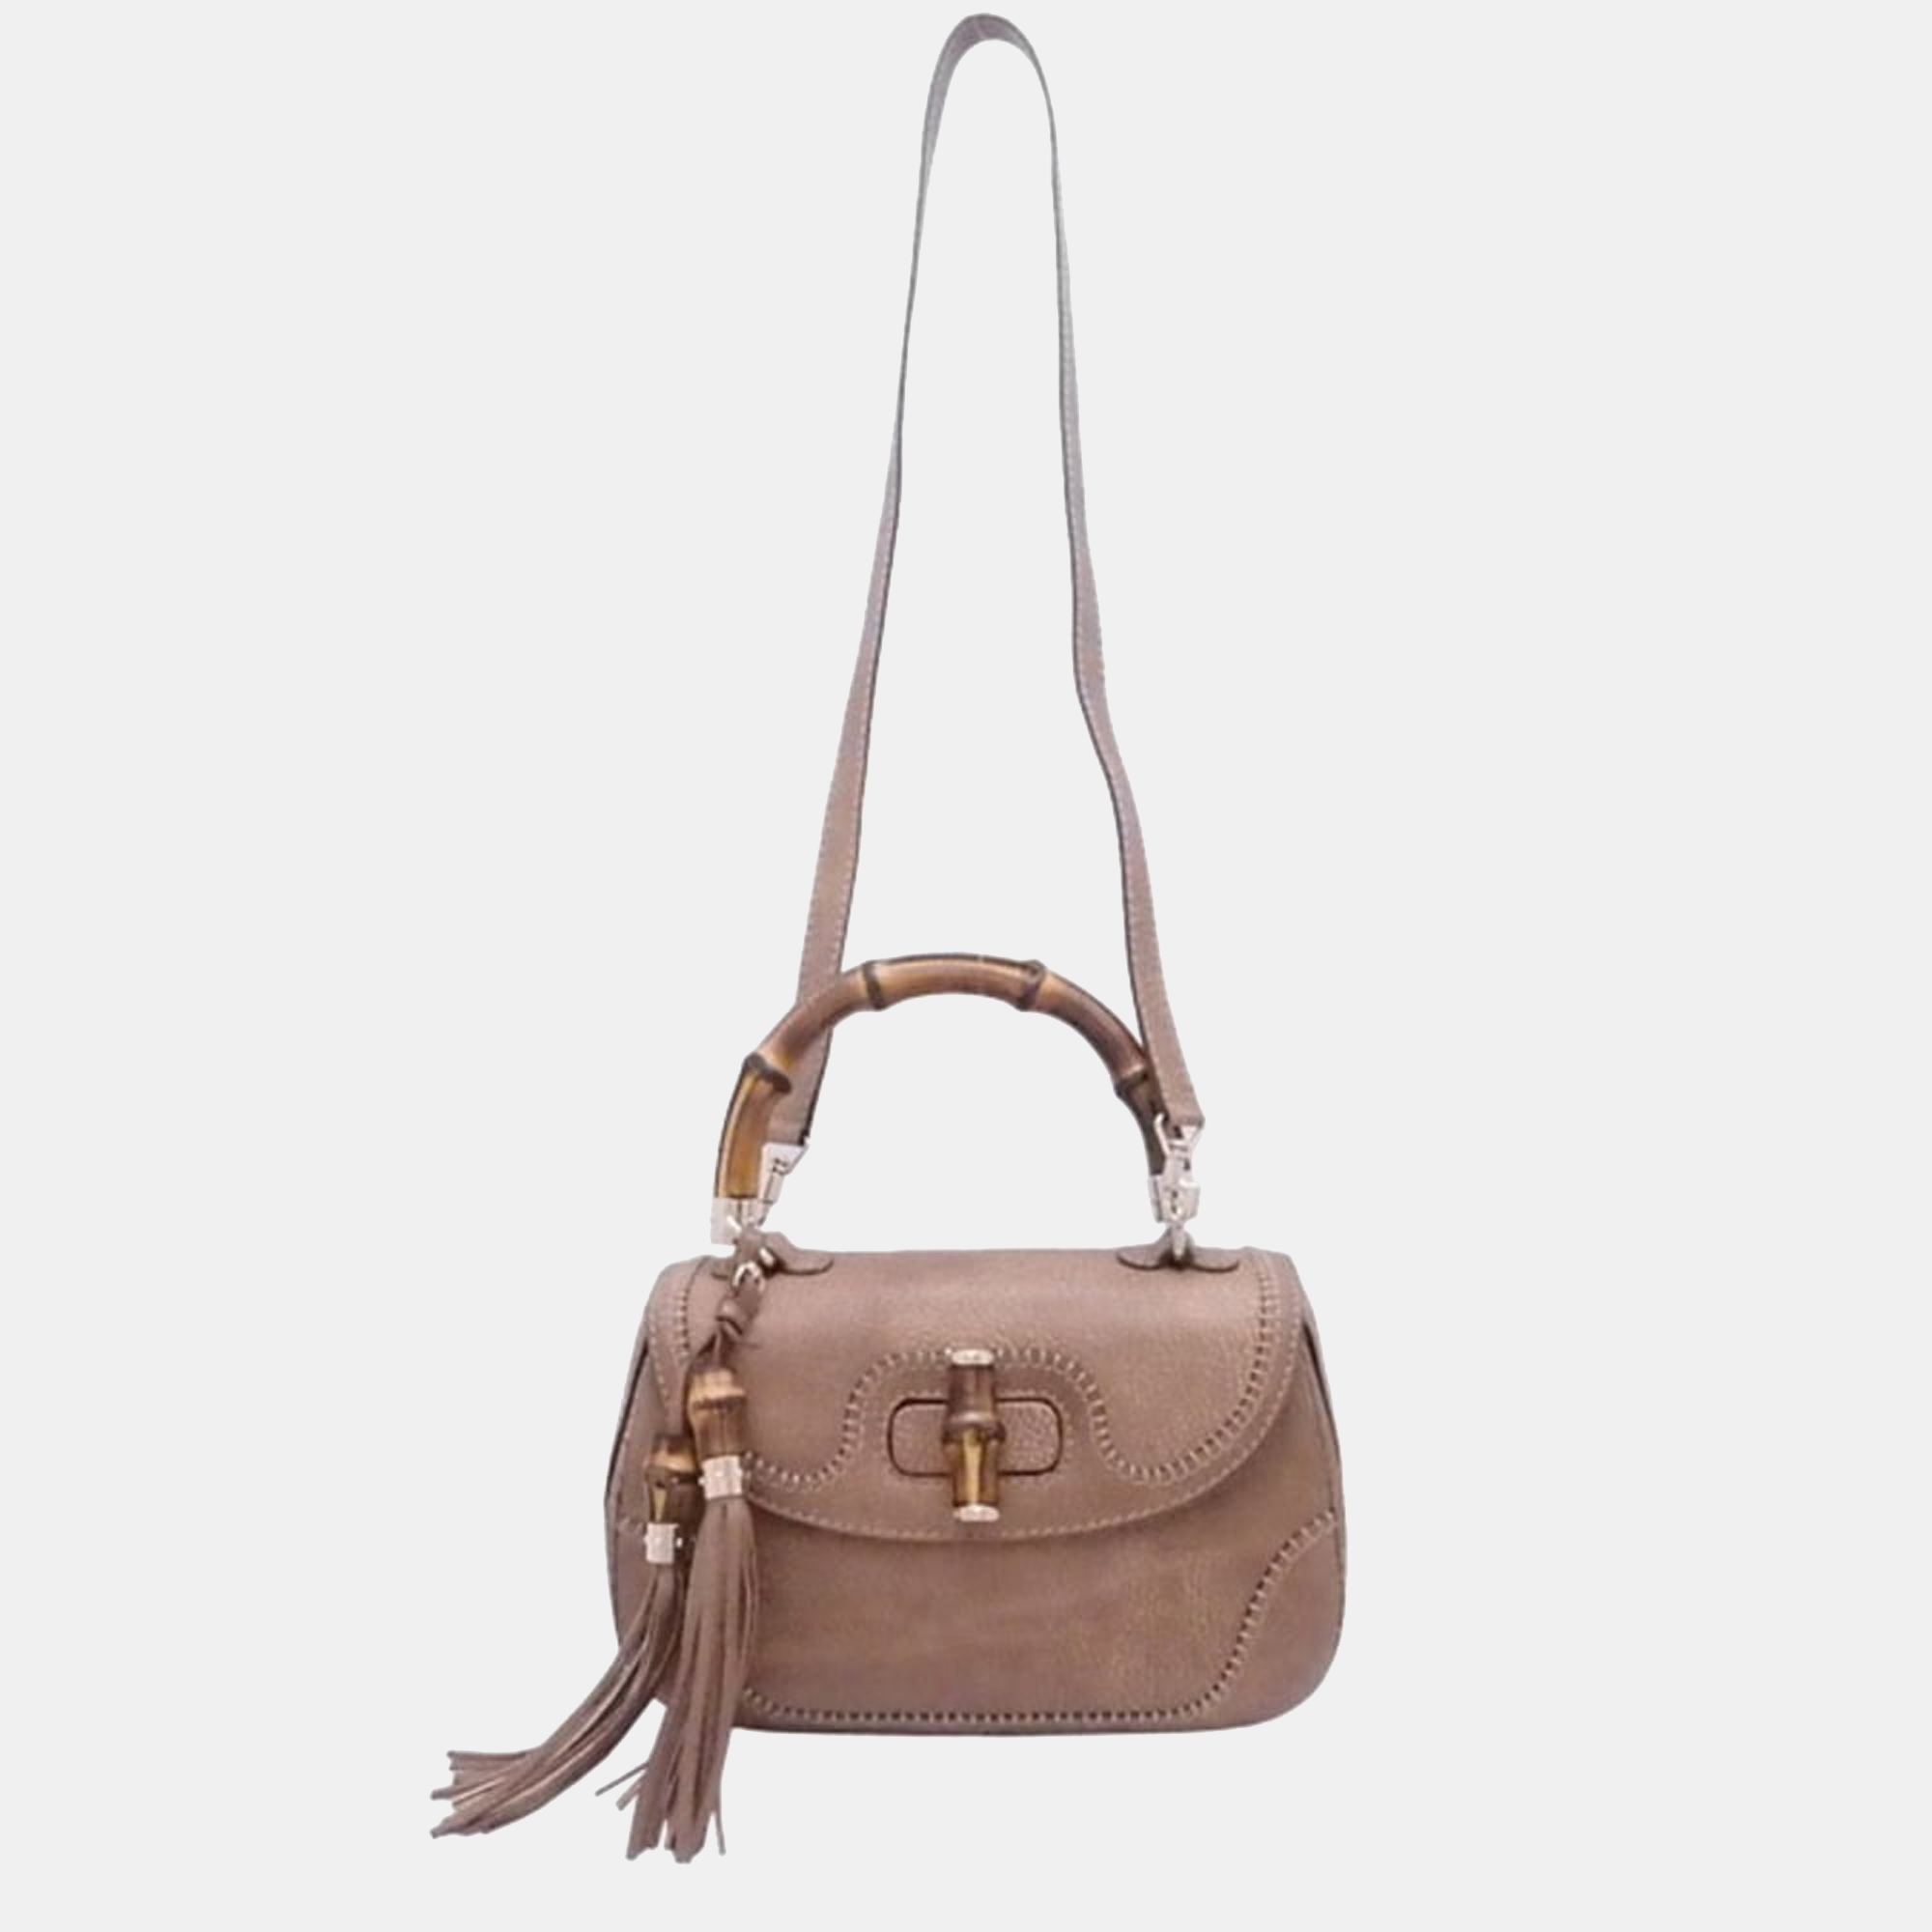 Gucci Brown Leather New Bamboo Top Handle Bag